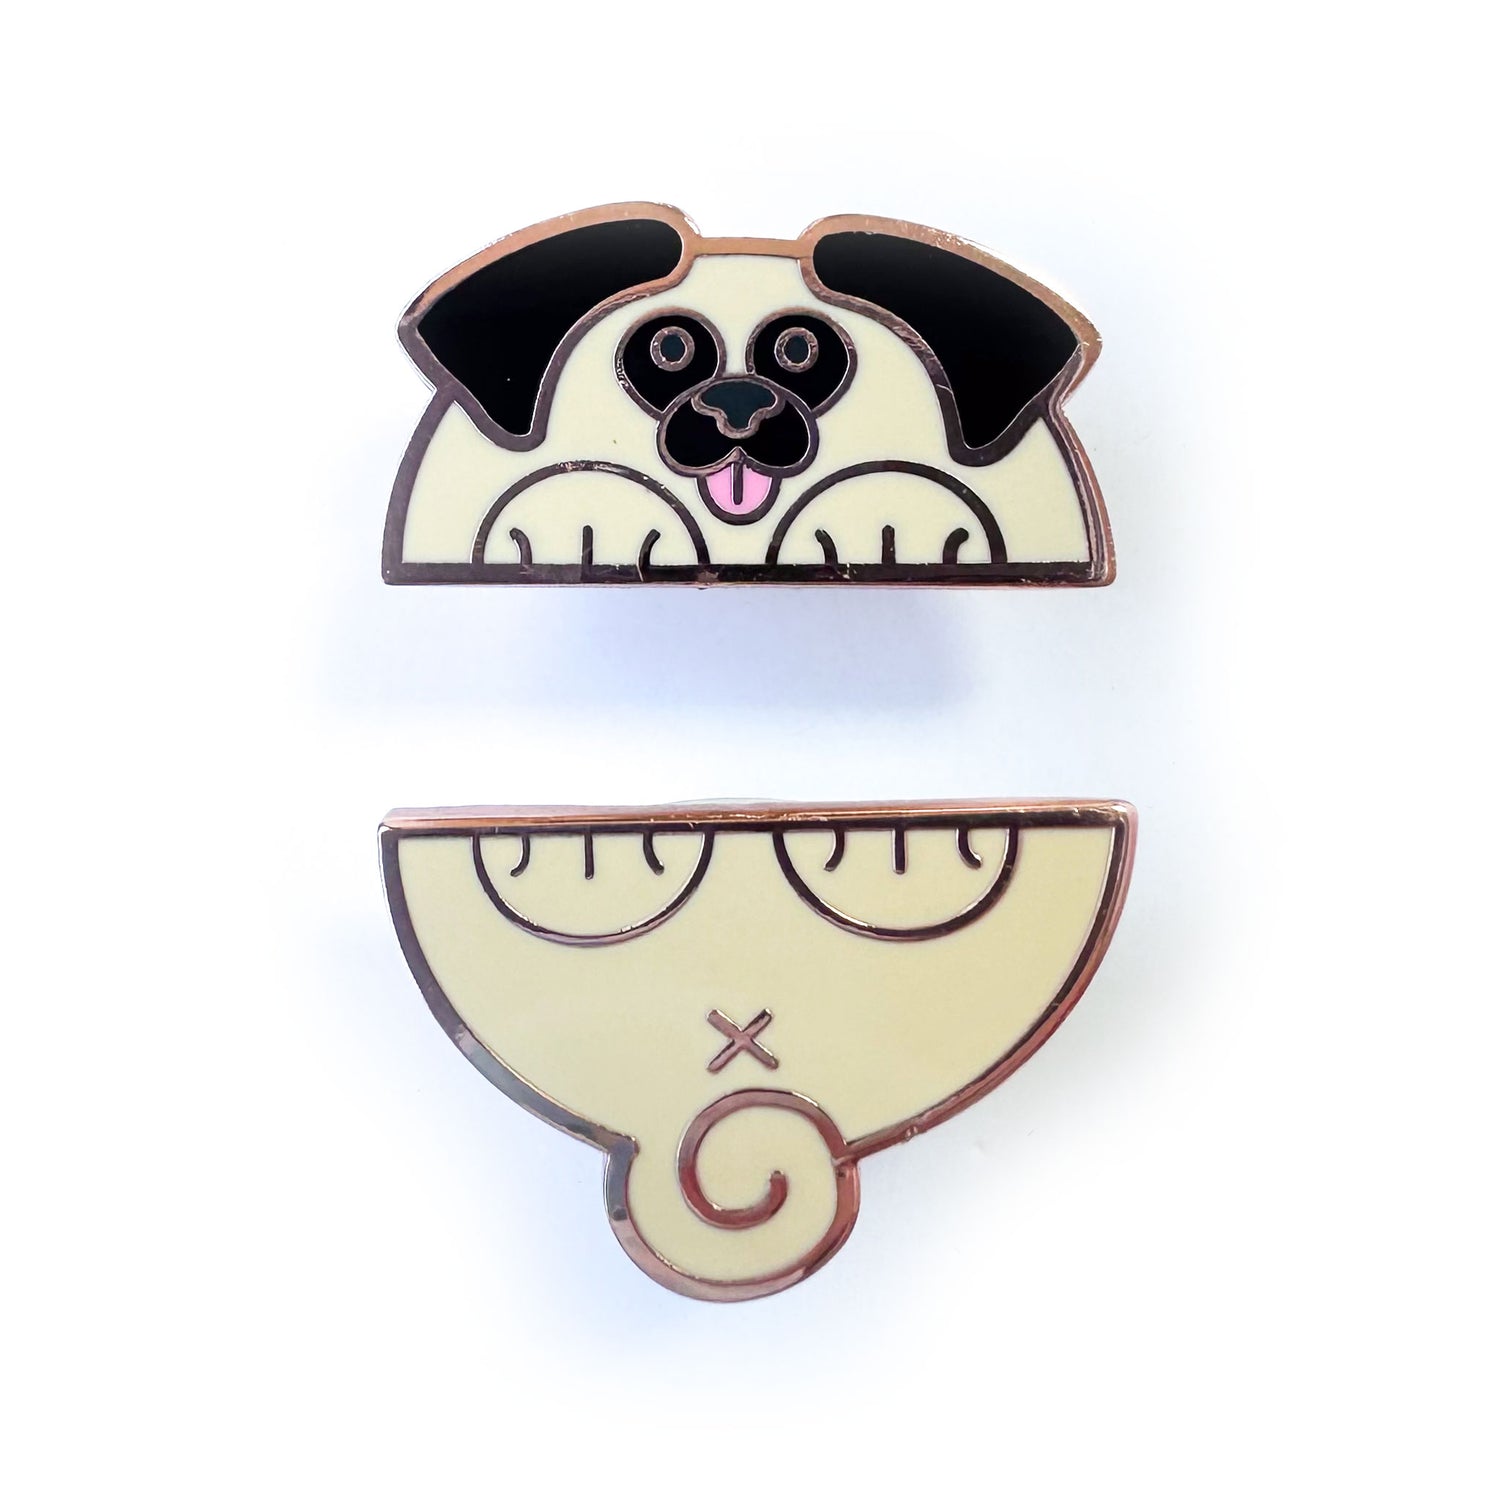 Two enamel pins that come together in the middle to form a pug dog, the top half is the head and front paws and the bottom is the tail and back paws. 